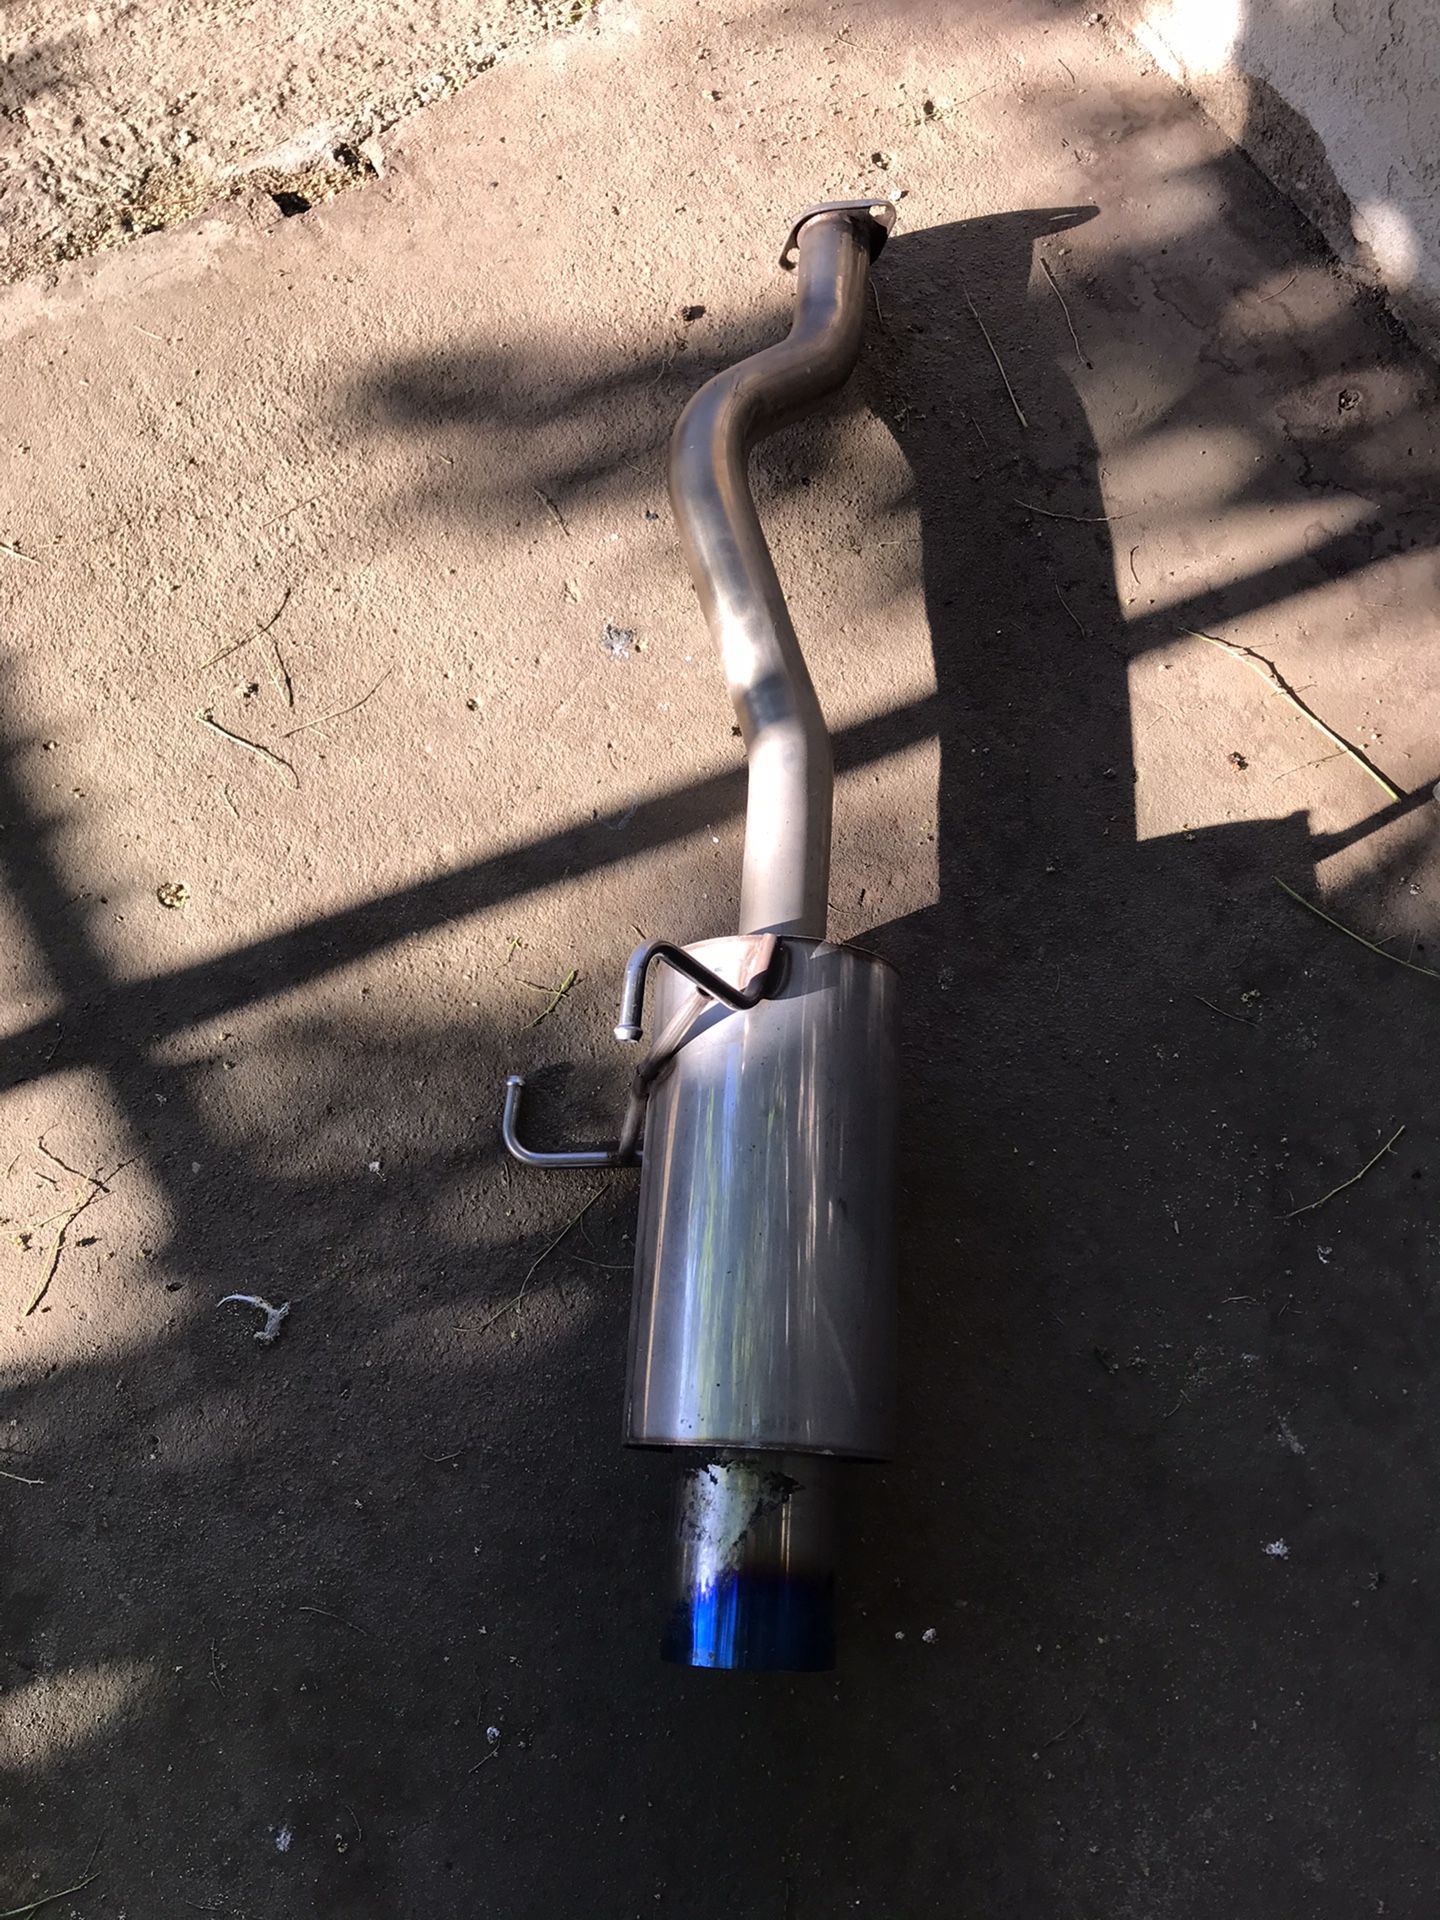 04-05 Civic coupe exhaust